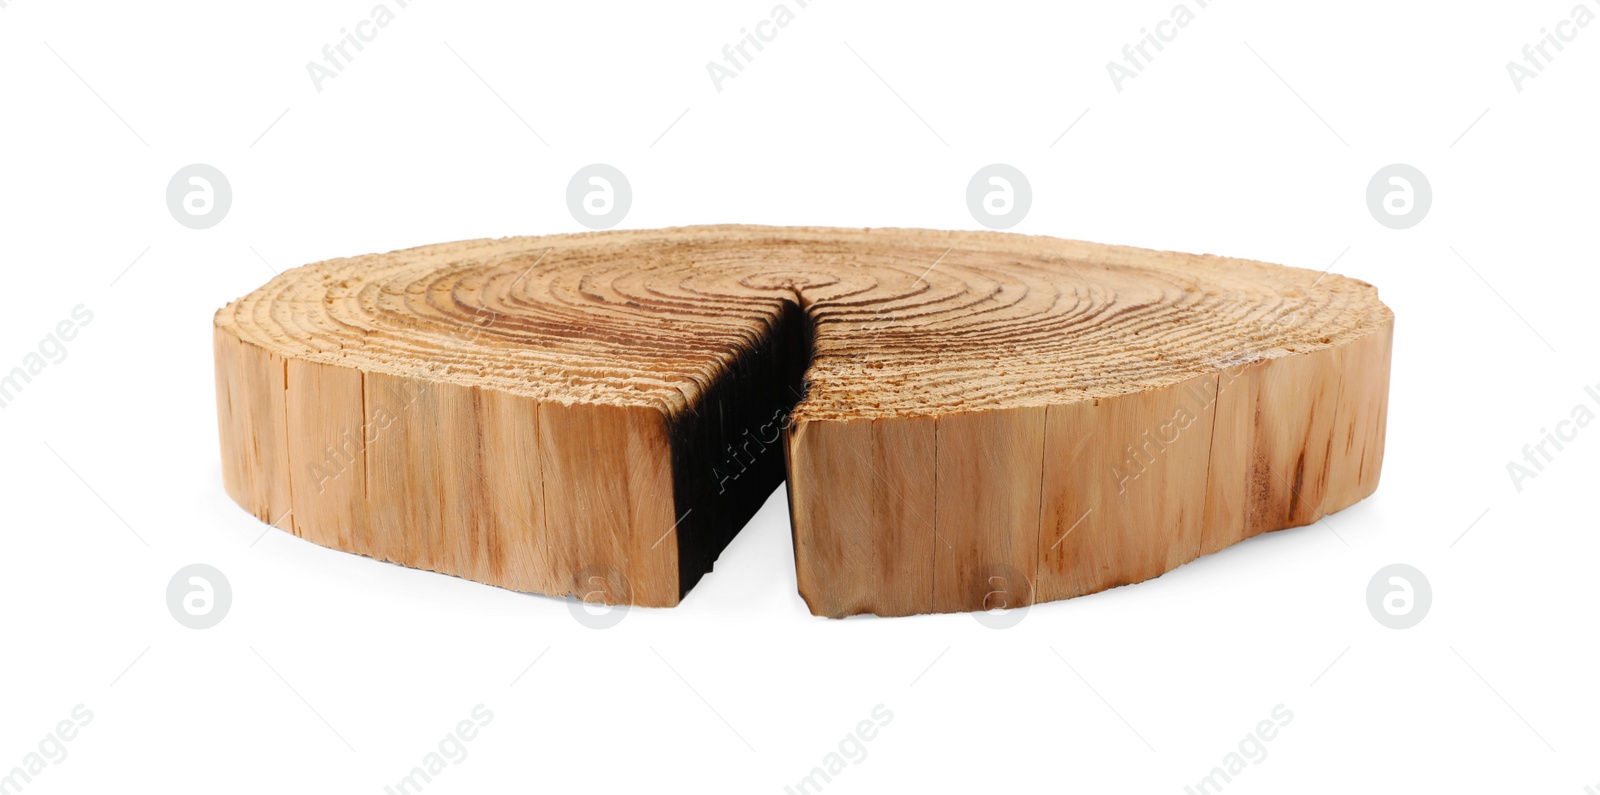 Photo of Cracked tree stump as decorative stand isolated on white